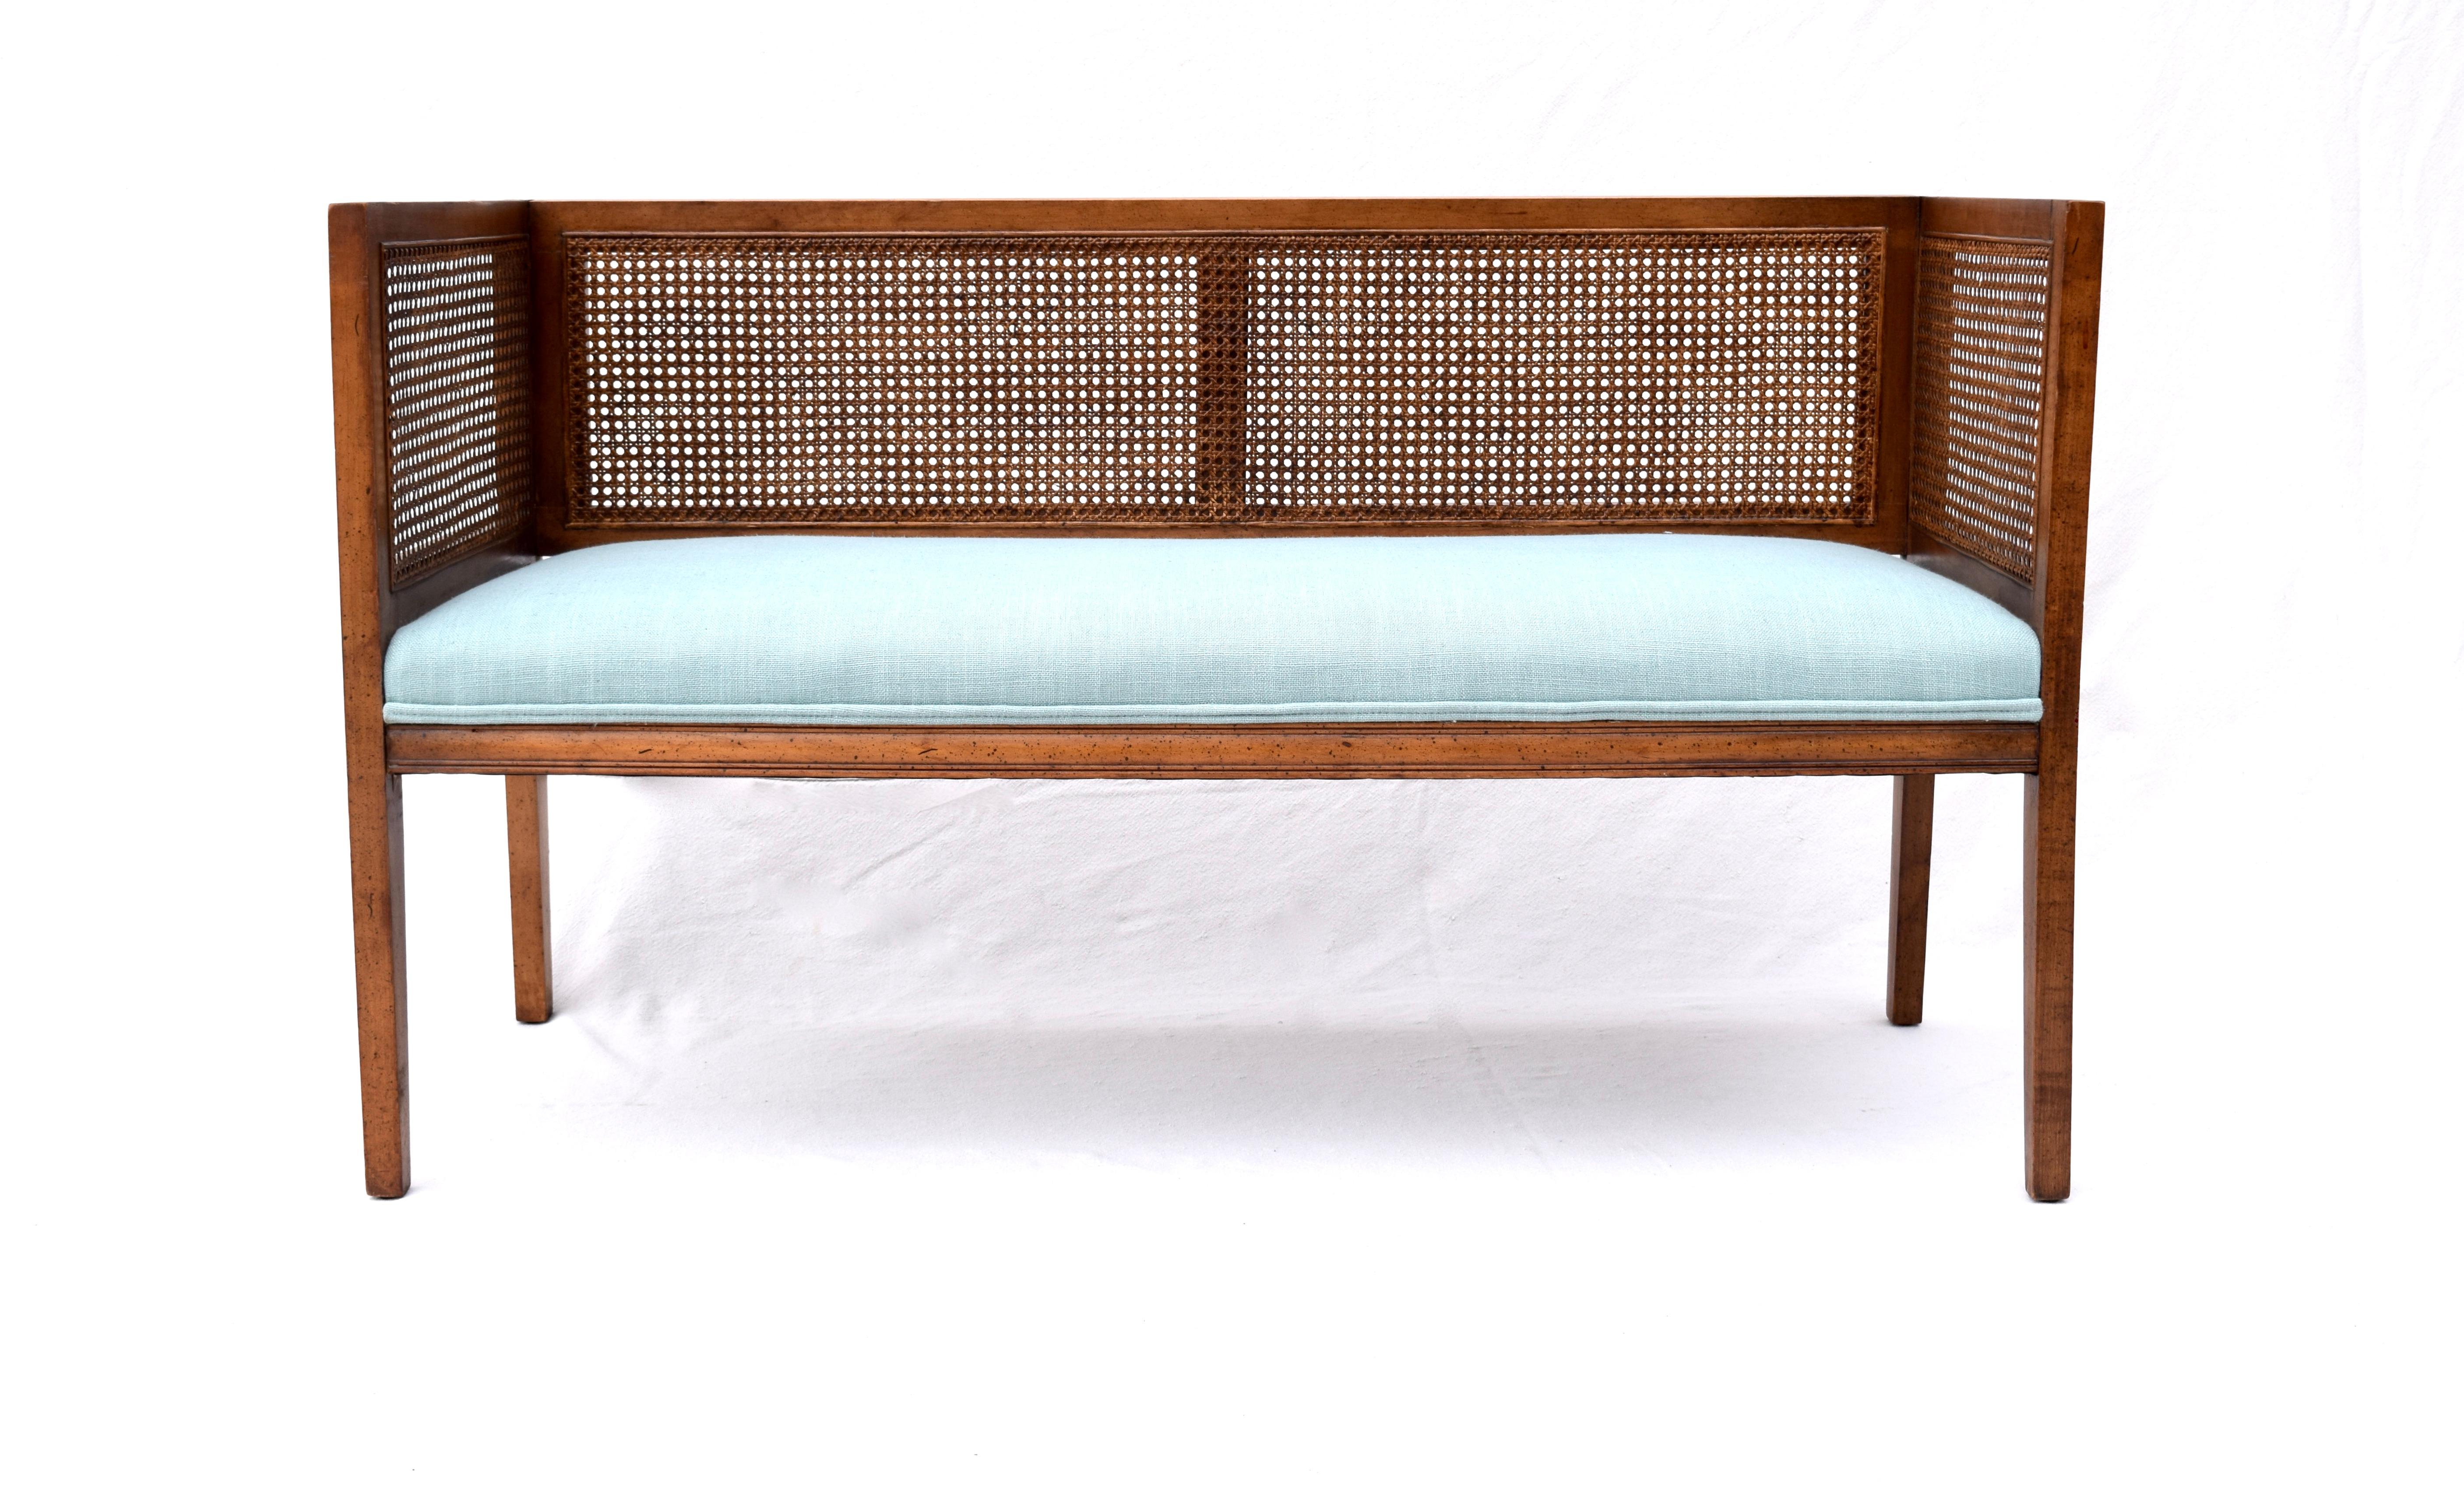 Solid walnut Mid-Century Modern window bench or settee in the manner of Edward Wormley for Dunbar. Beautifully maintained all original caning & finish with warm patina. Restored seat and bolster cushions are upholstered is soft blue linen.